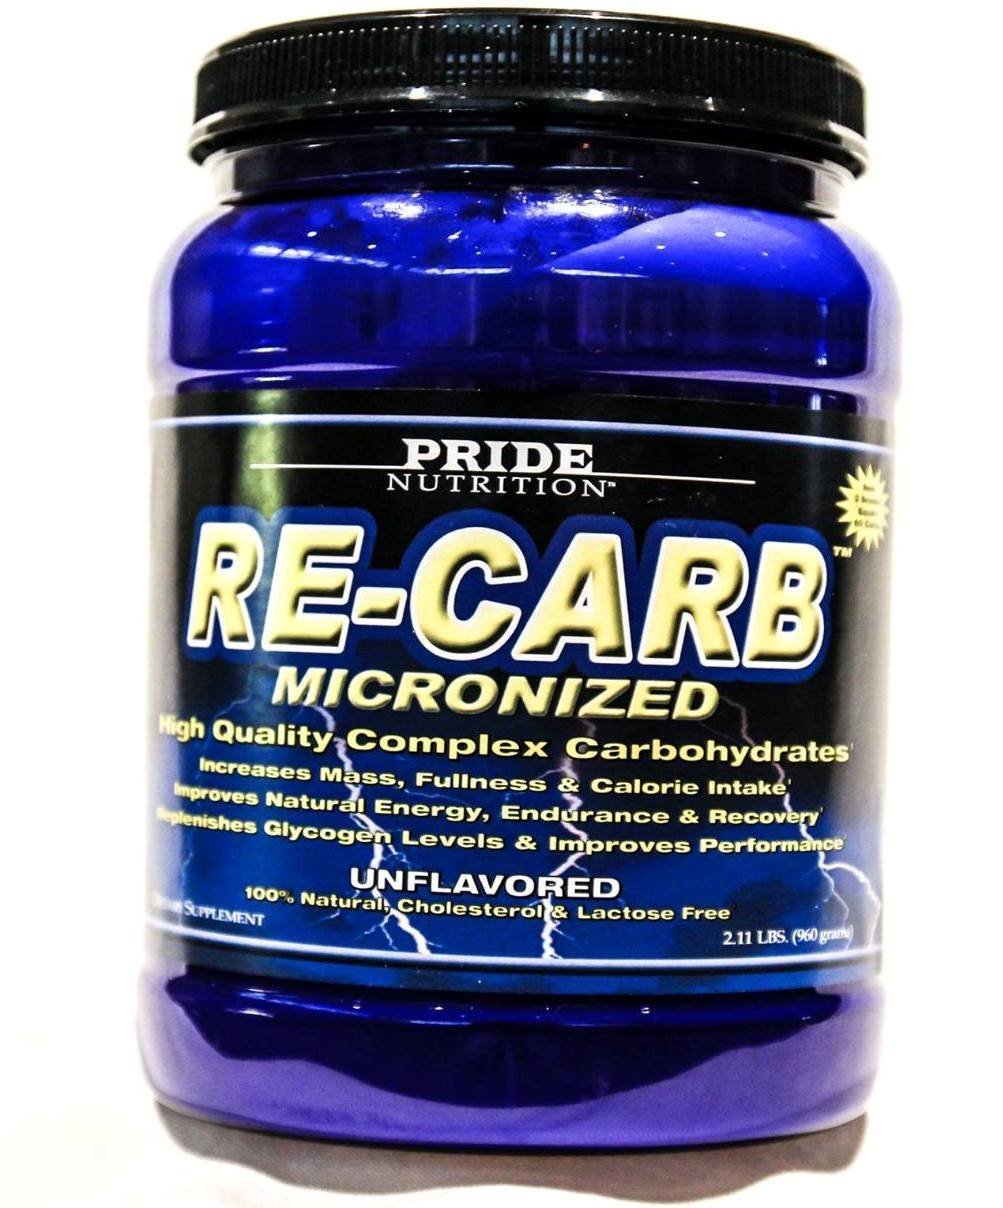 Re Carb Complex Carb High Quality Health Nutrition Supplements For Men And Women 4358